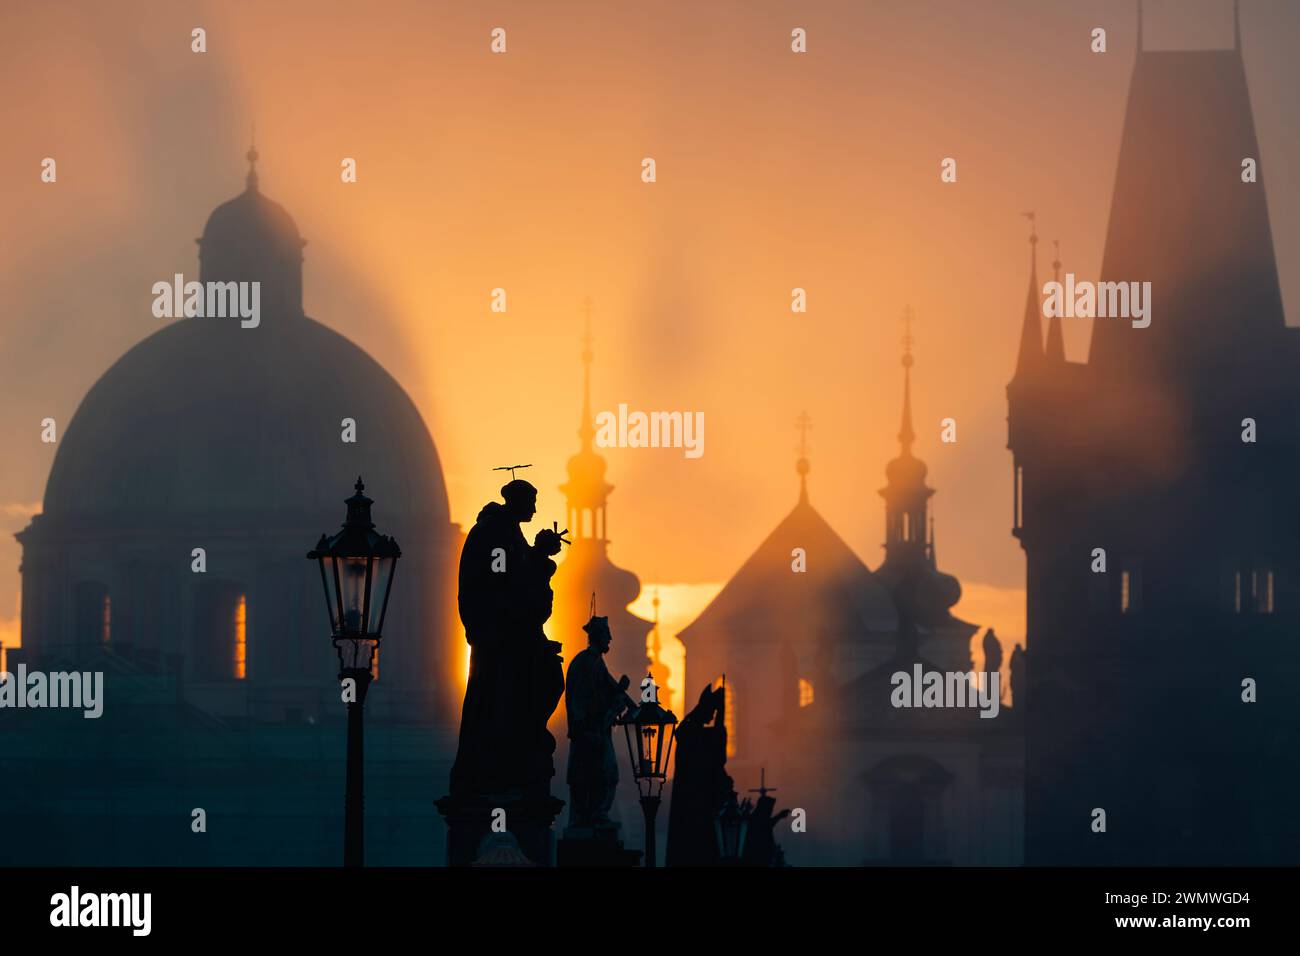 Statues on Charles Bridge against urban skyline with church and towers.  Beautiful sunrise in Prague, Czech Republic. Stock Photo